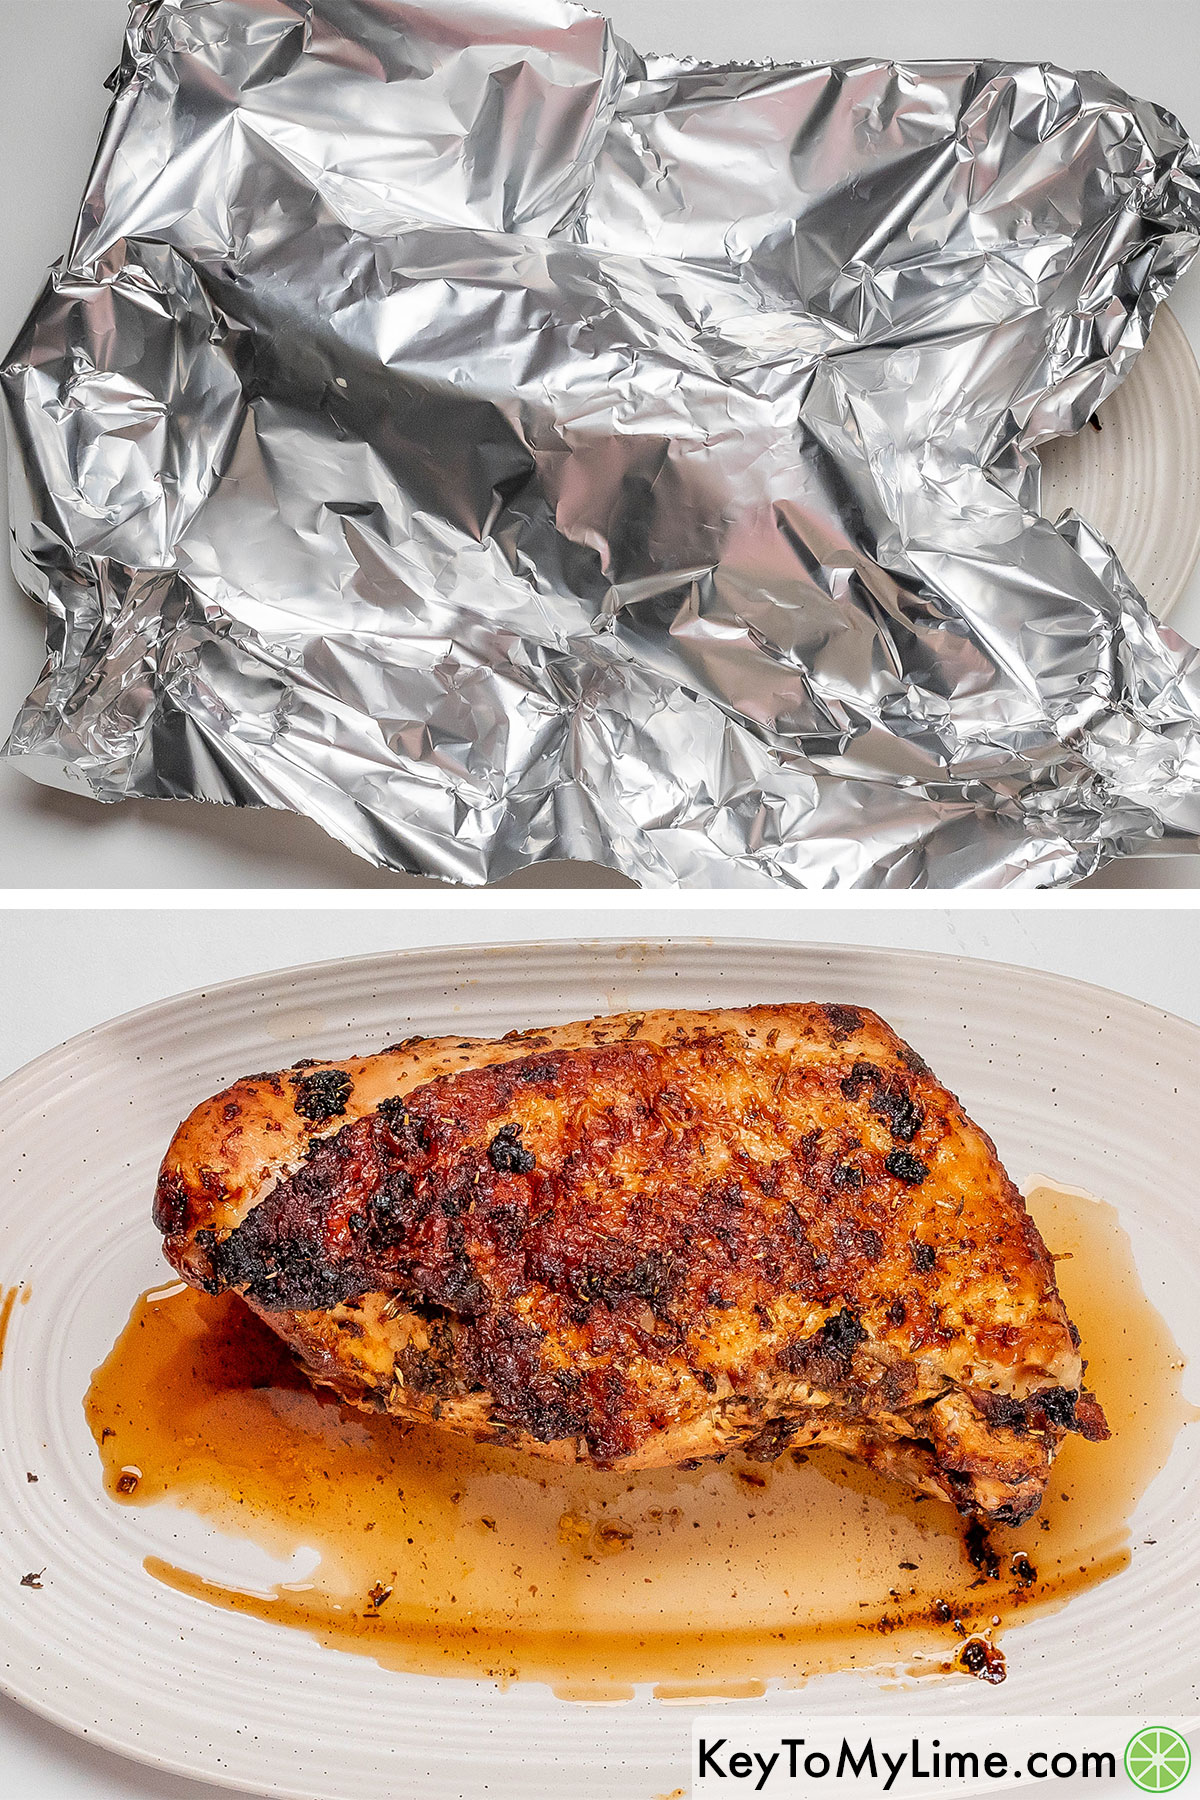 Removing the turkey breast from the air fryer, and then resting tented under aluminum foil.